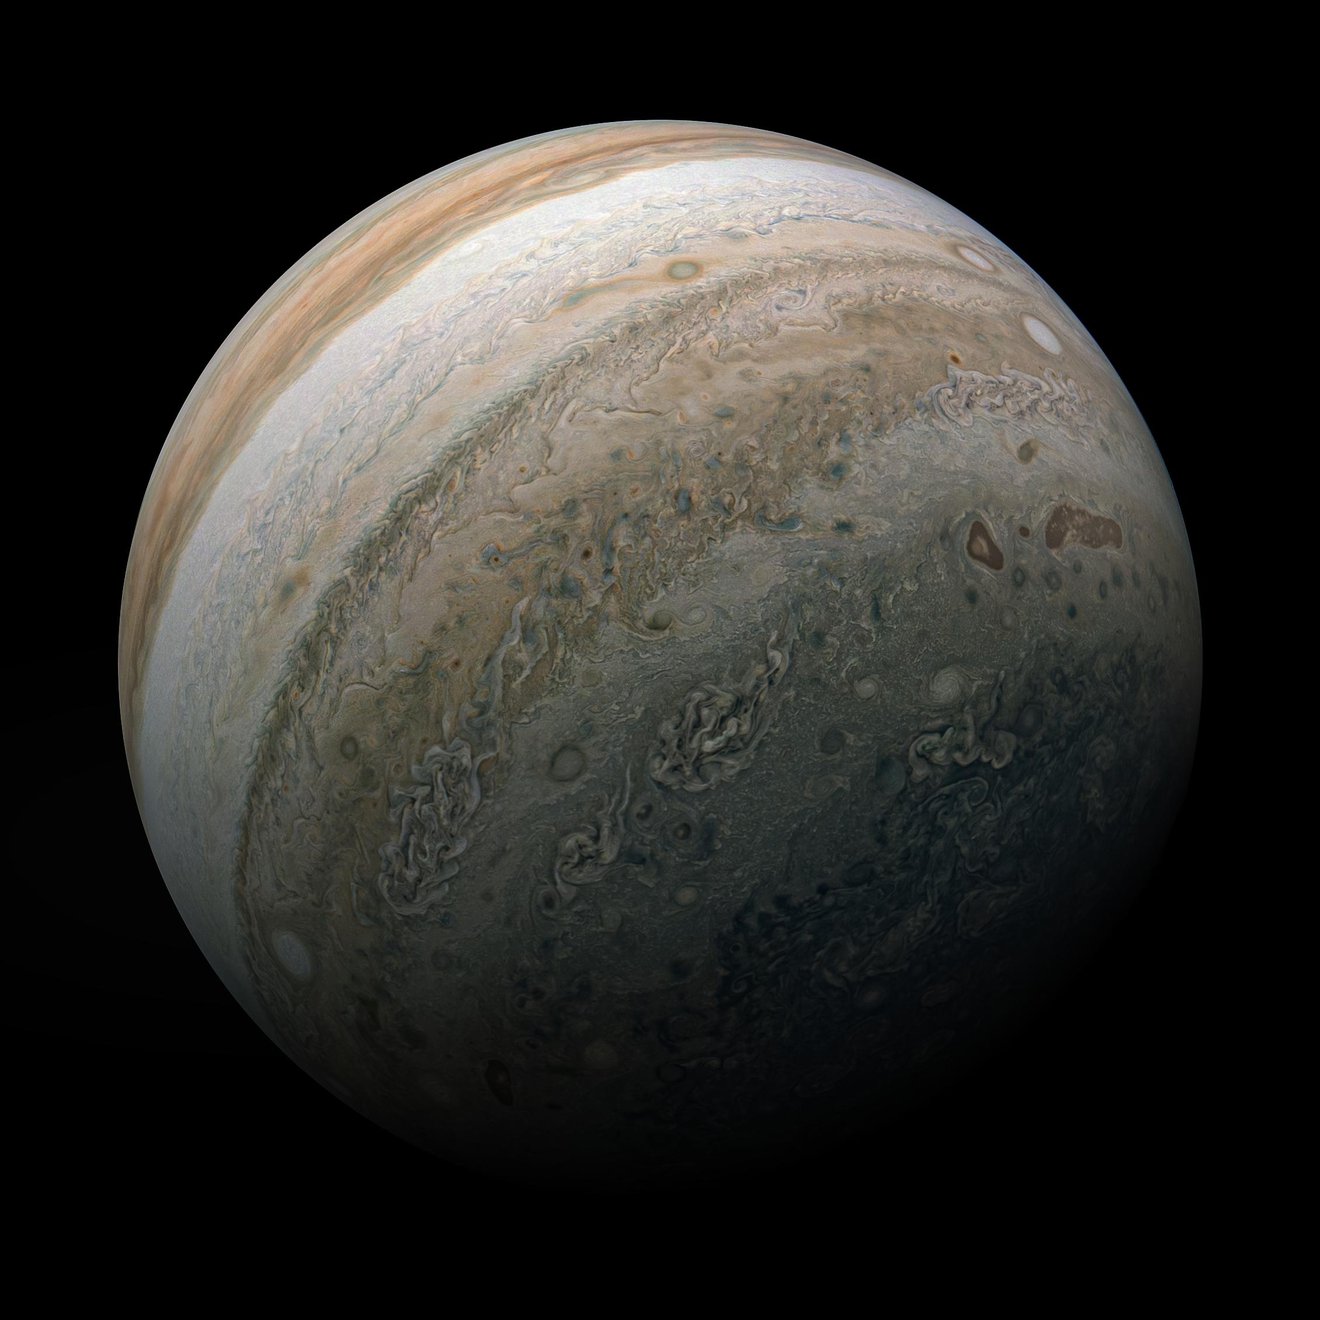 Jupiter set to make its closest approach to Earth in last 70 years: When and where to watch?